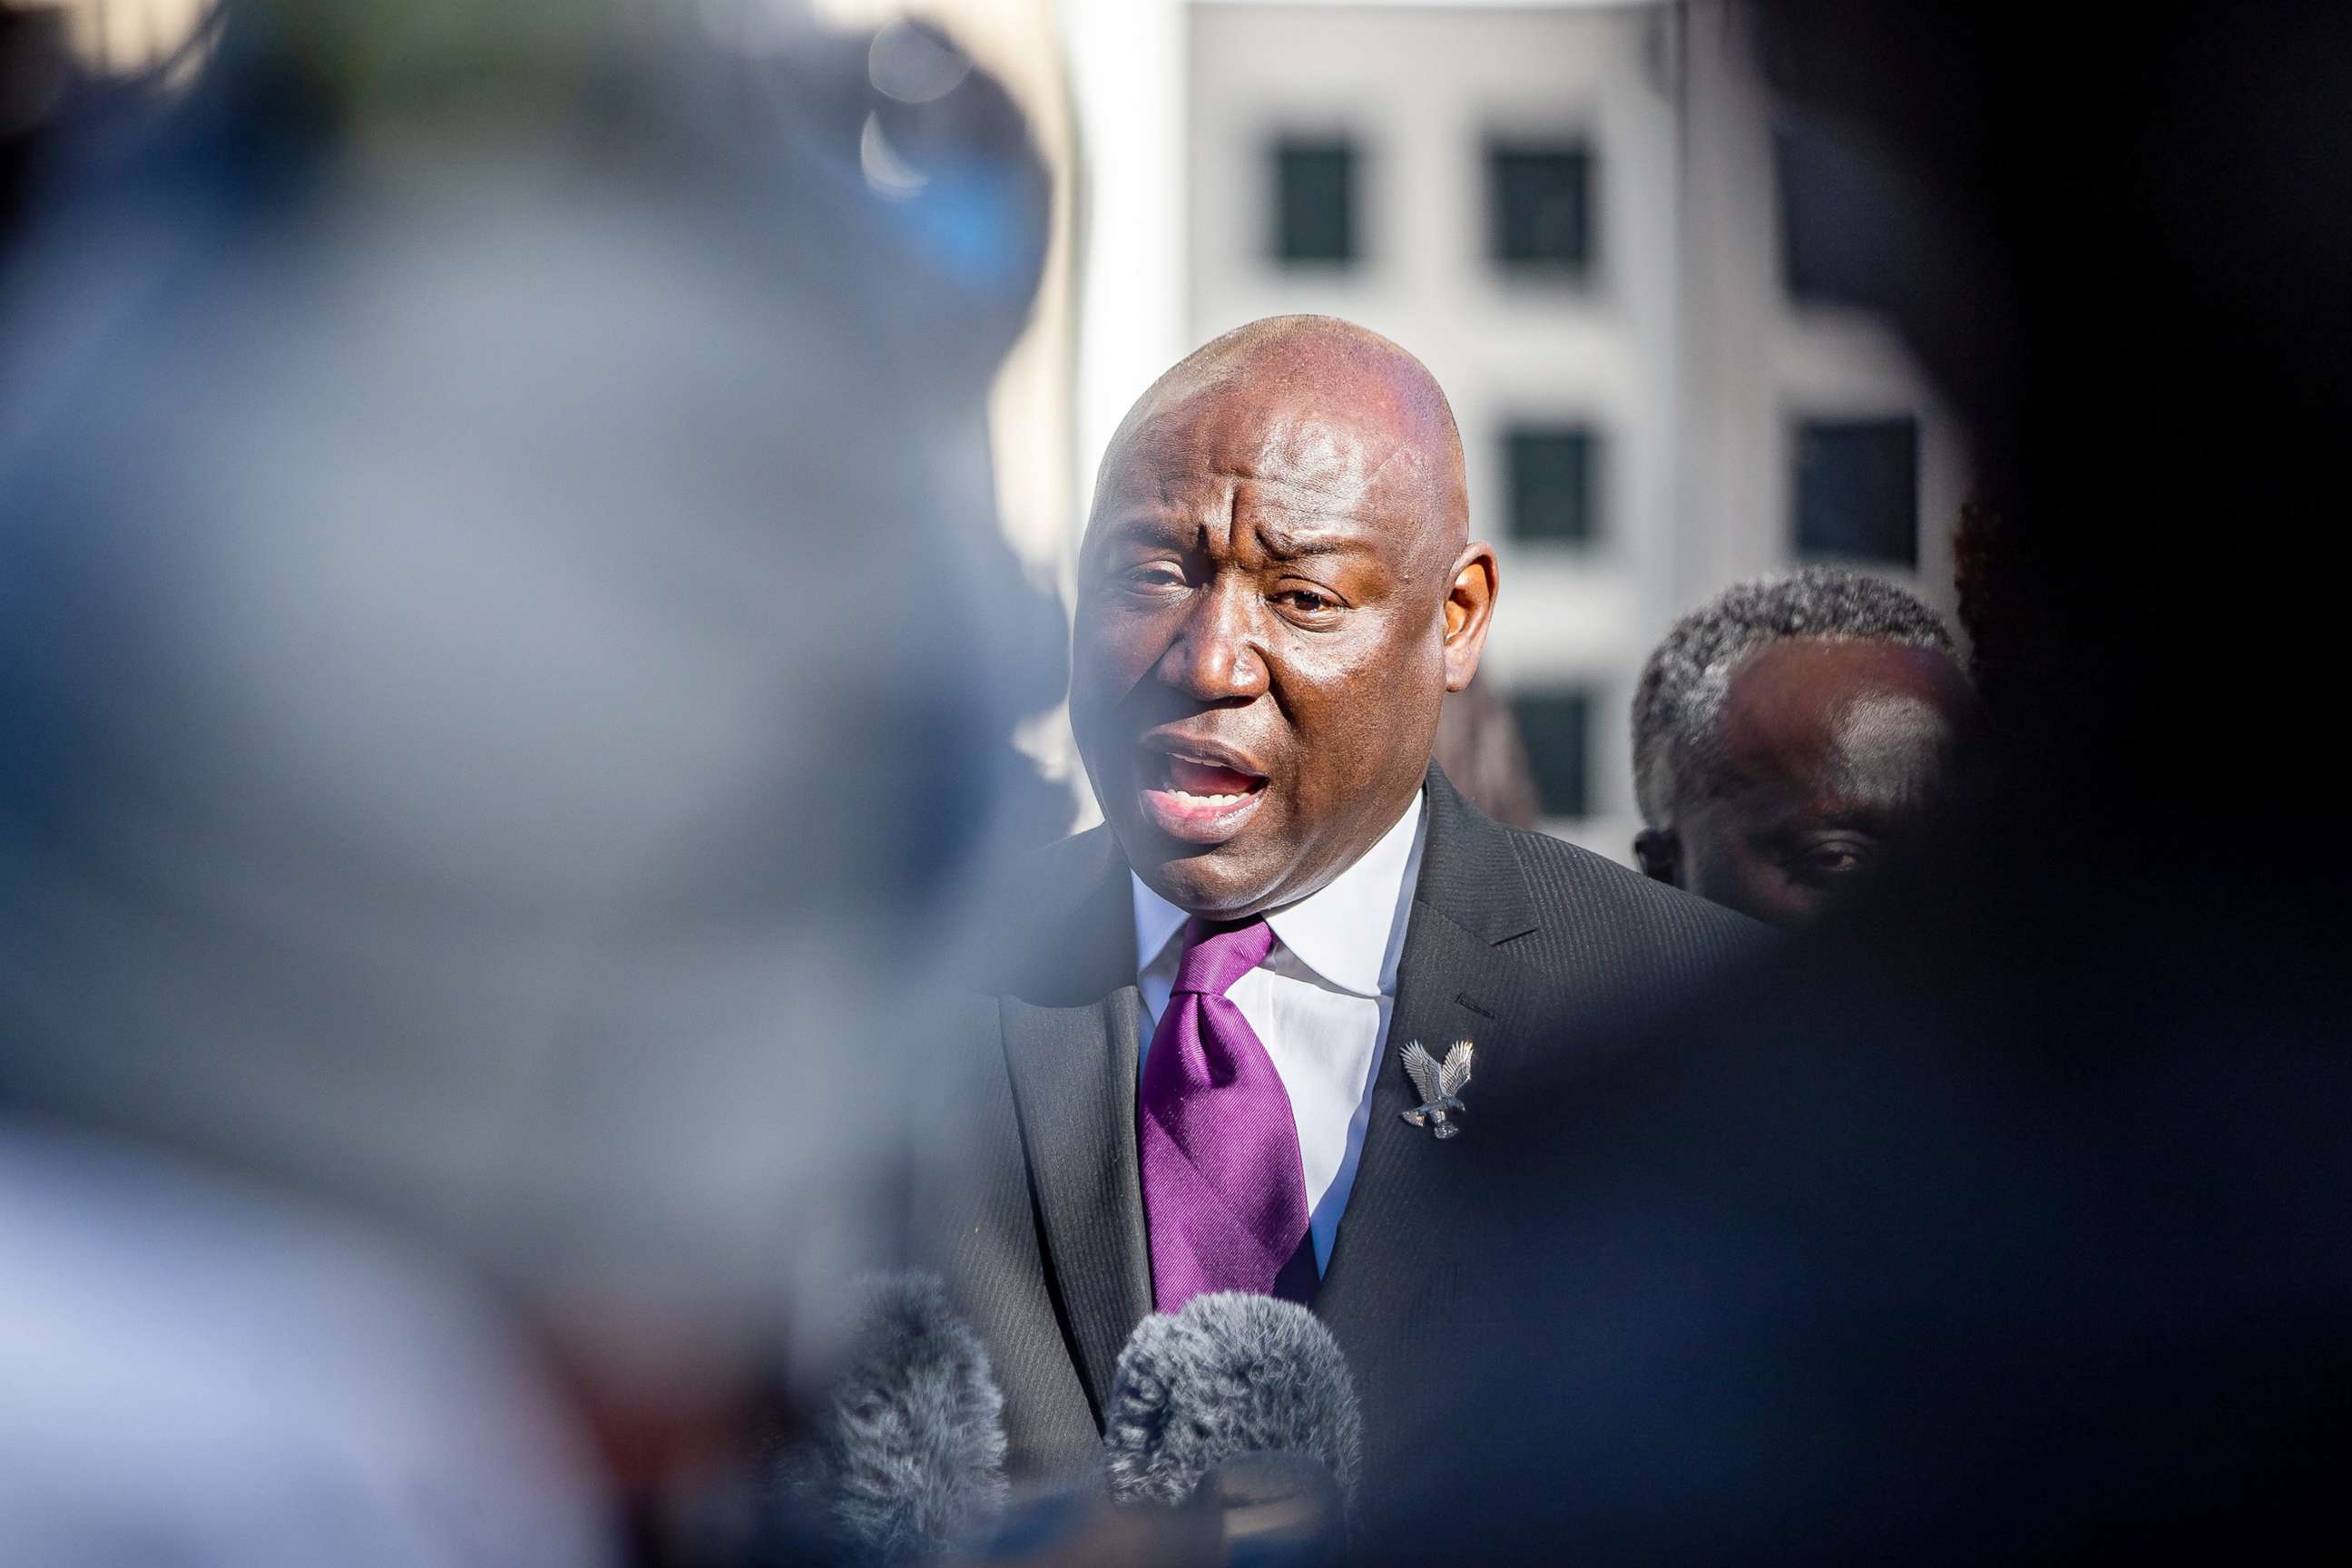 PHOTO: Attorney Ben Crump addresses the media before entering the courthouse in Savannah, Ga., Nov. 24, 2021.
